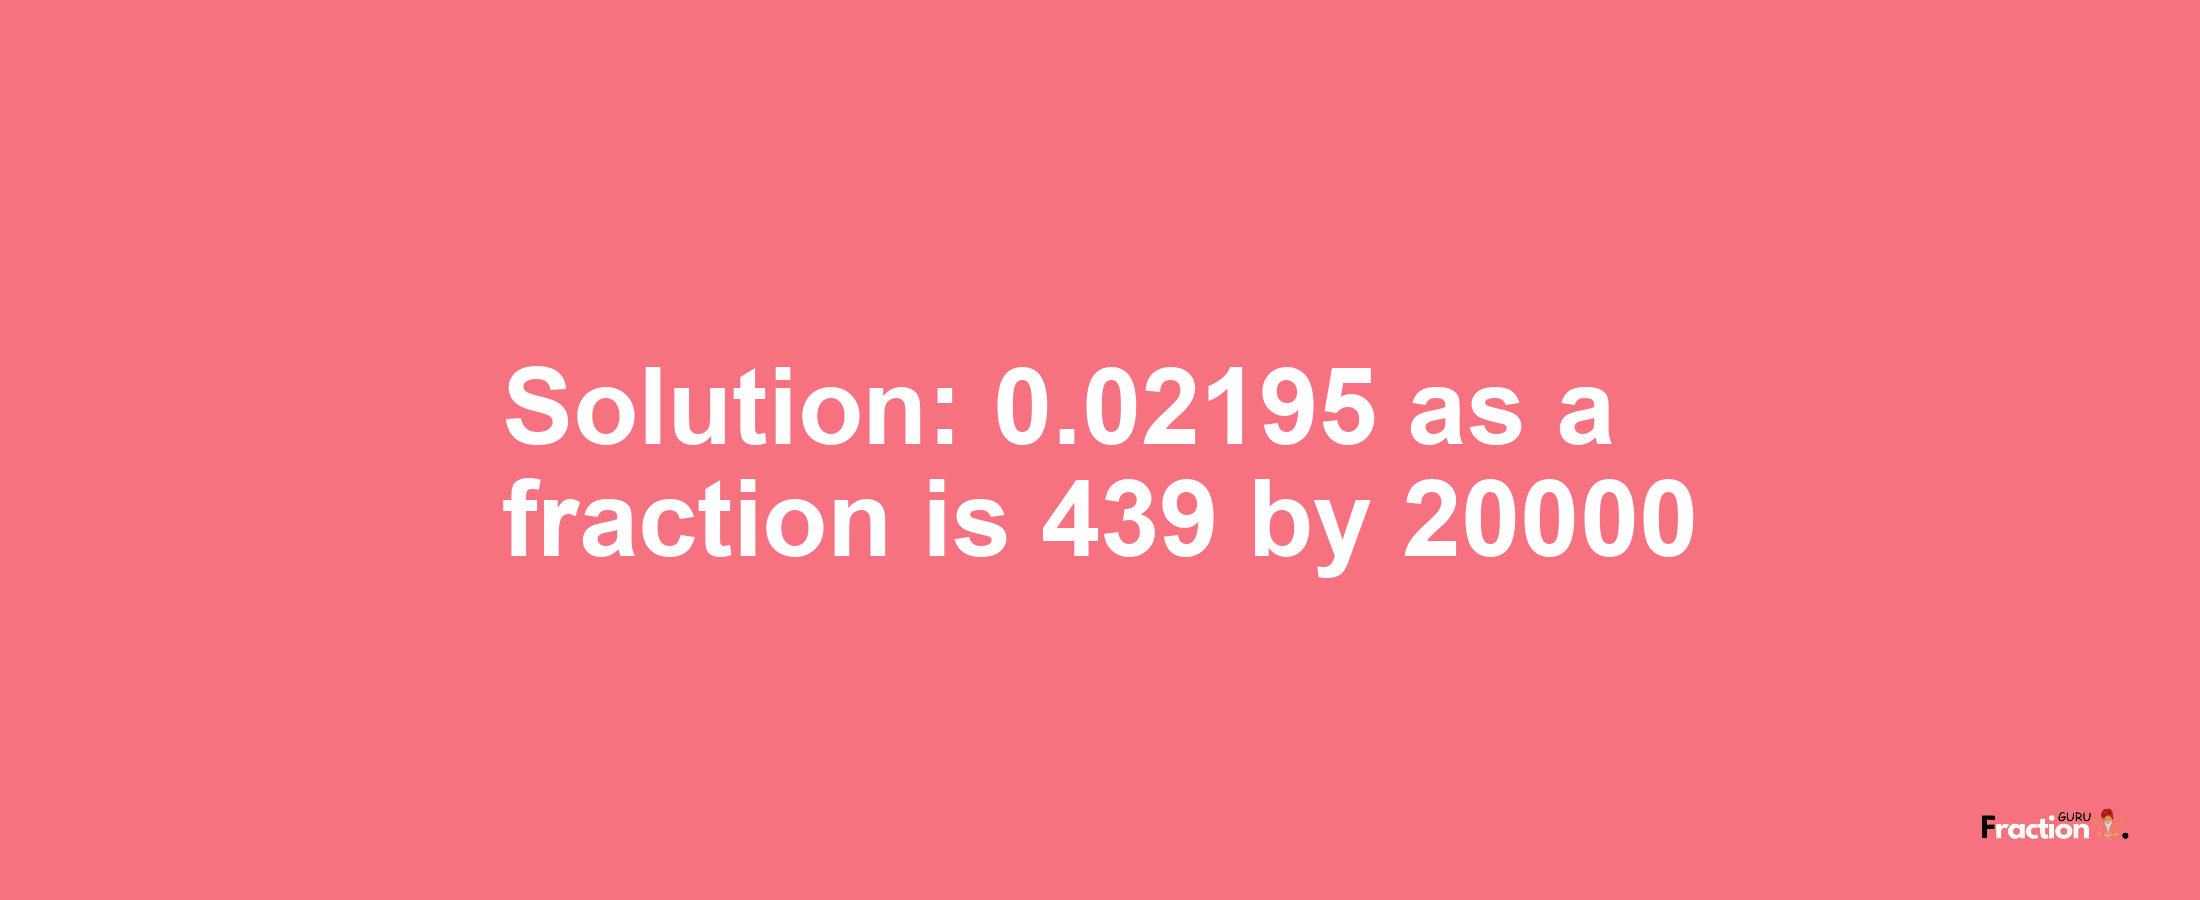 Solution:0.02195 as a fraction is 439/20000